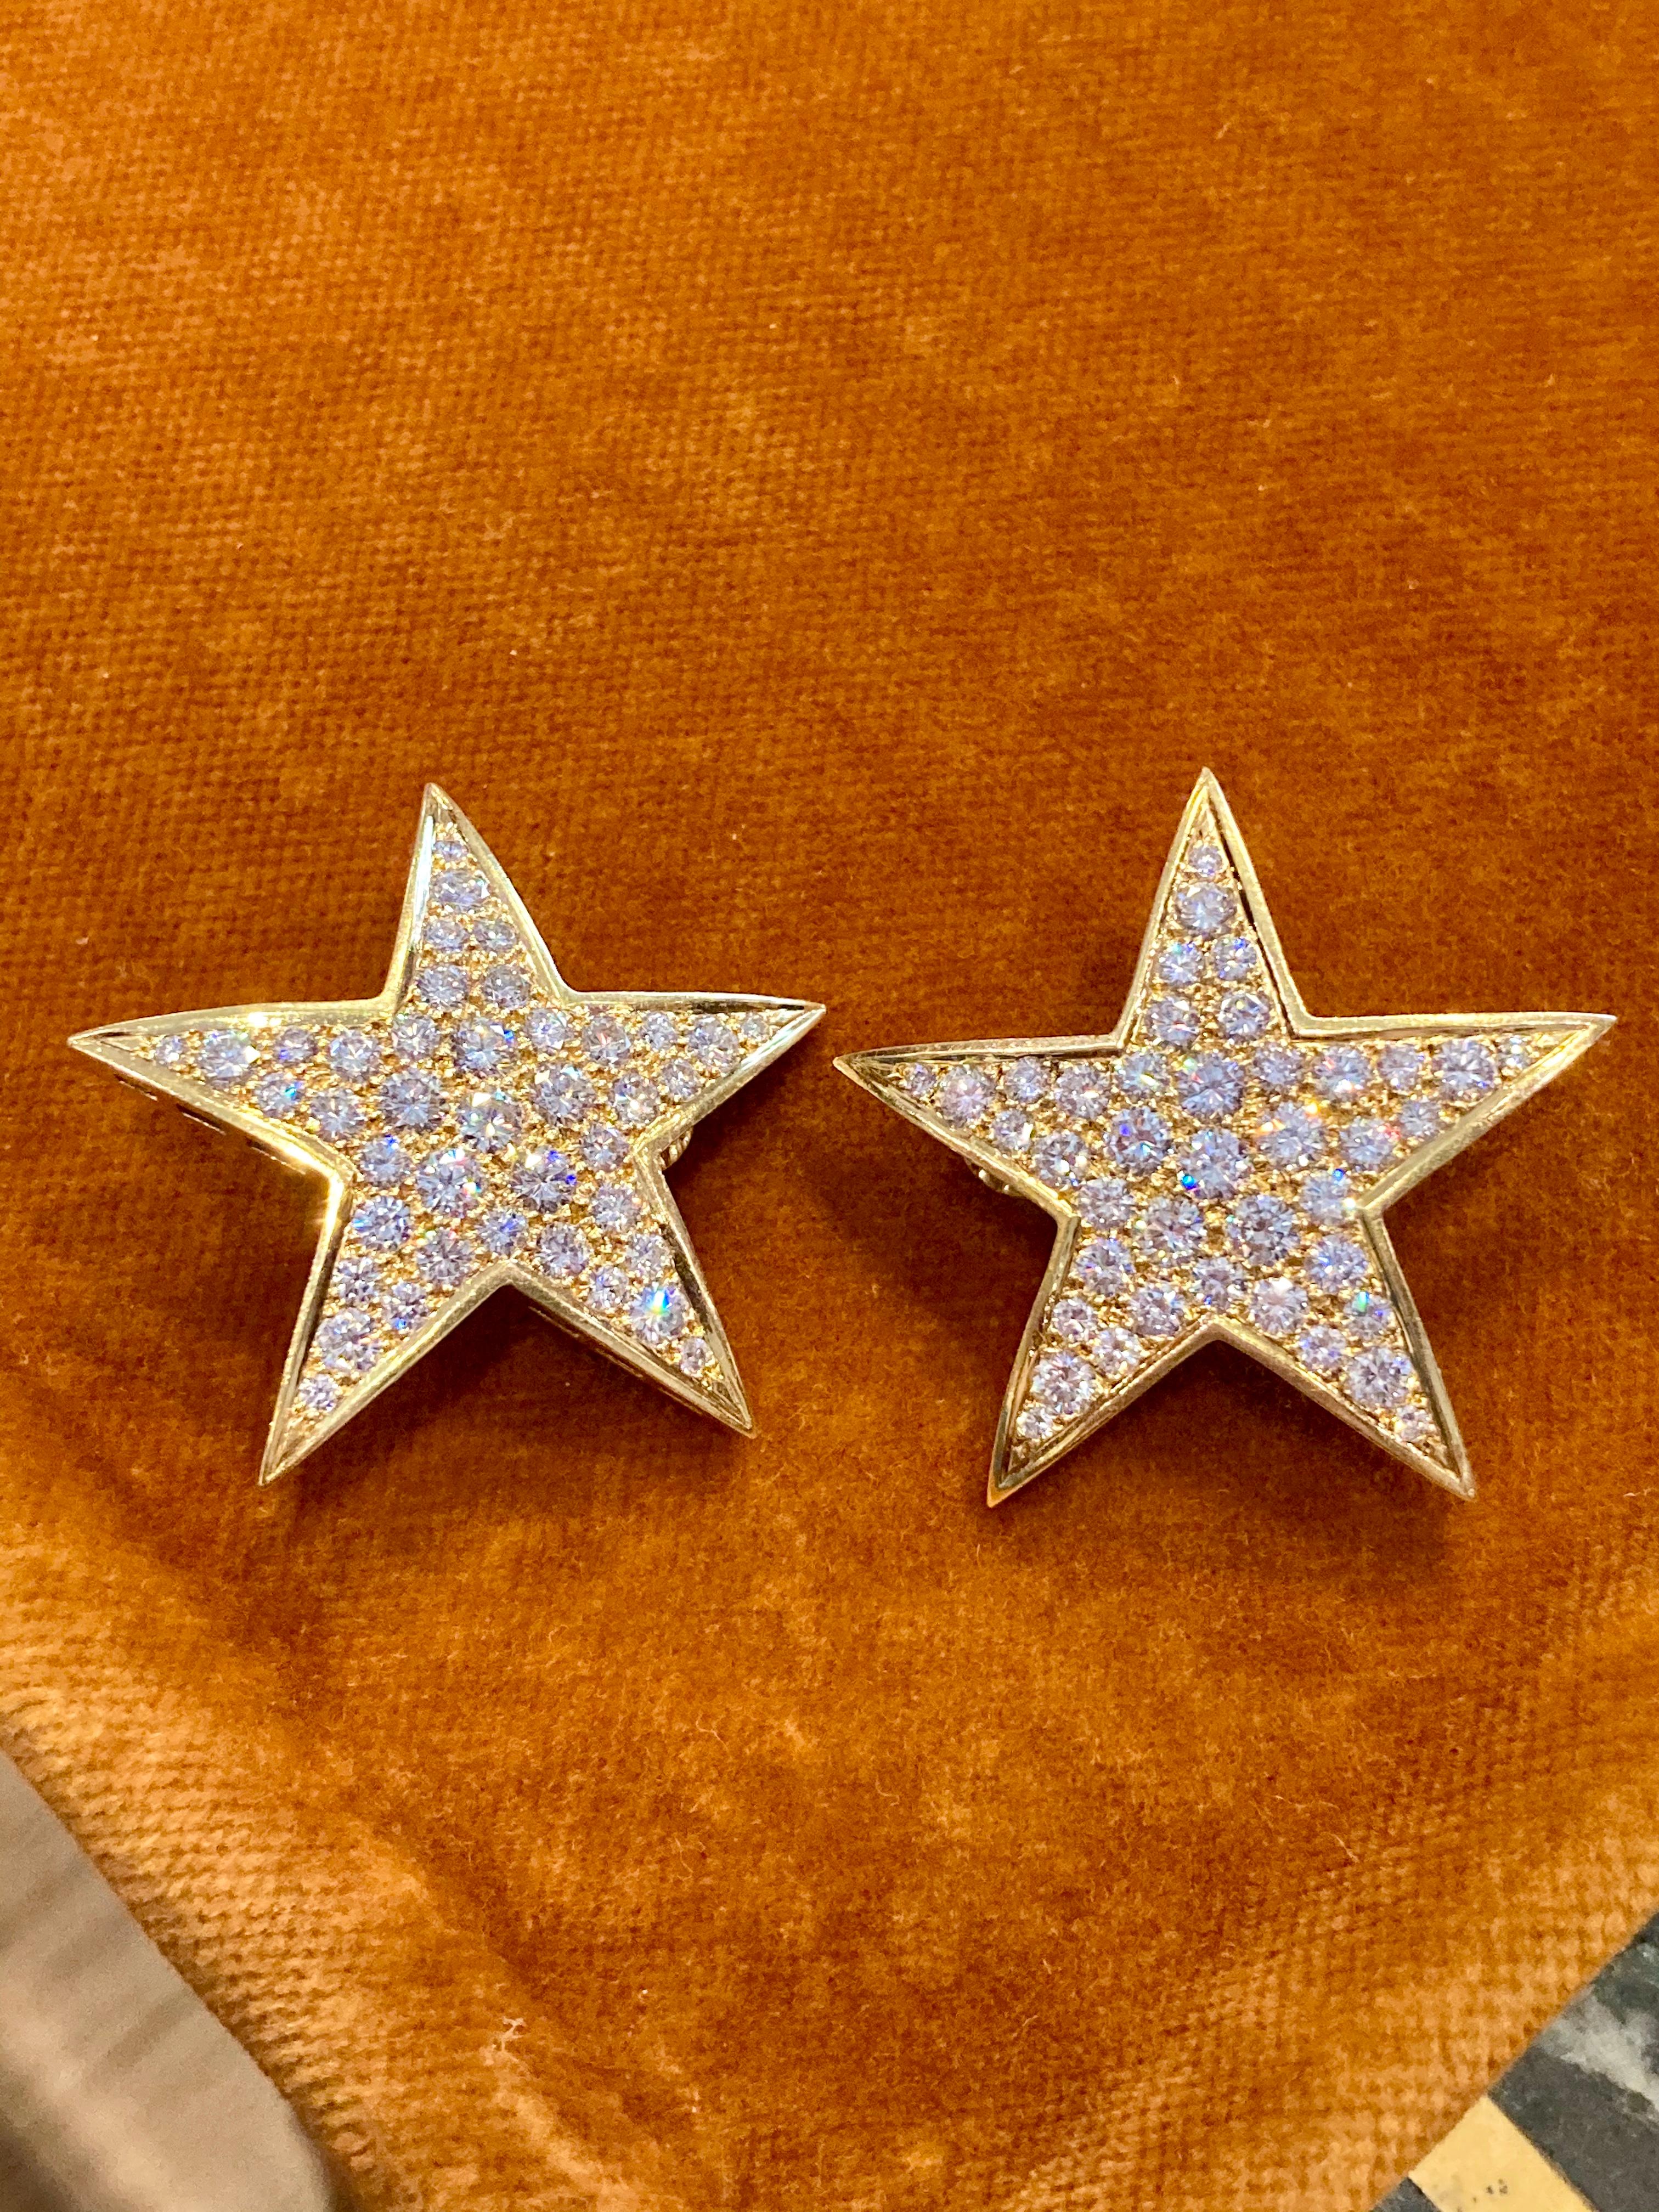 Stunning diamond star earclips circa 1970, featuring an open back that enhances the sparkle of the stones. Mounted in 18 karat yellow gold, with 5 carats of brilliant cut diamonds.